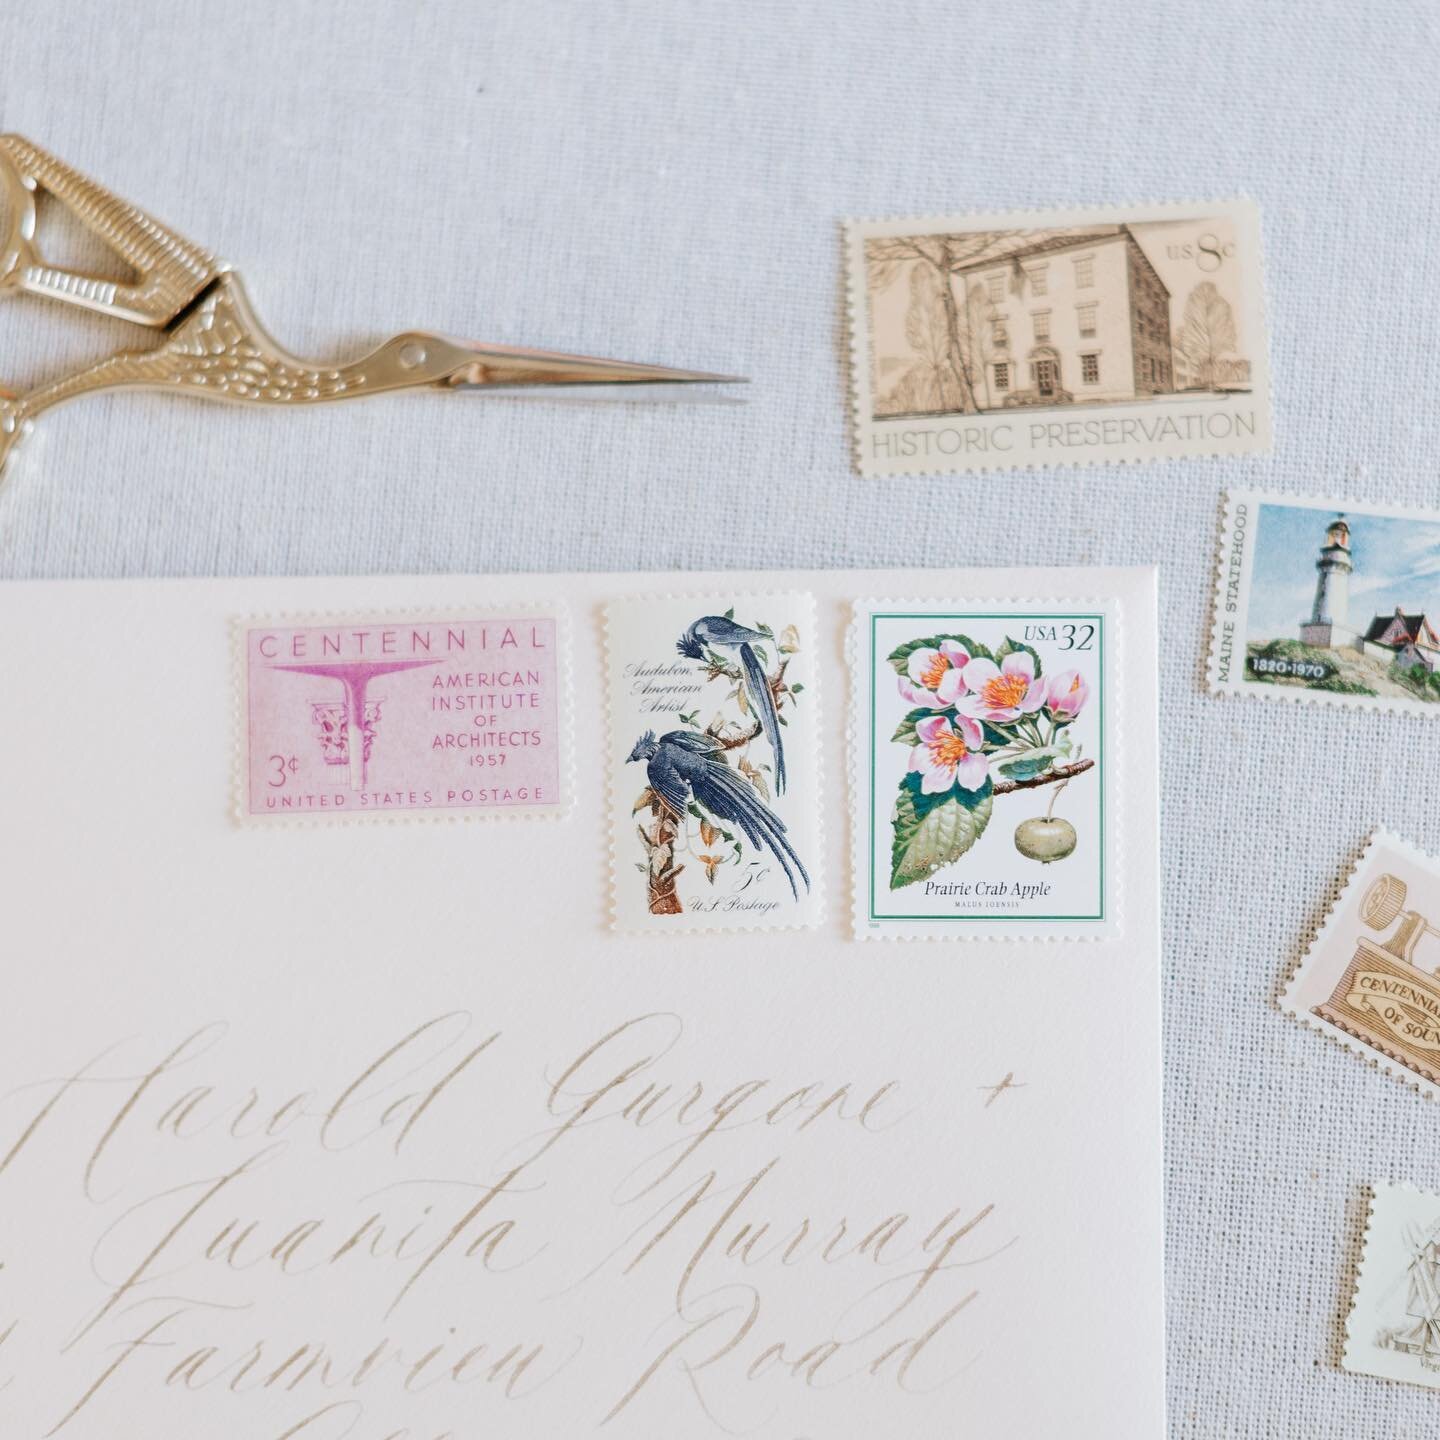 Vintage postage stamps are the perfect final touch. 🫶